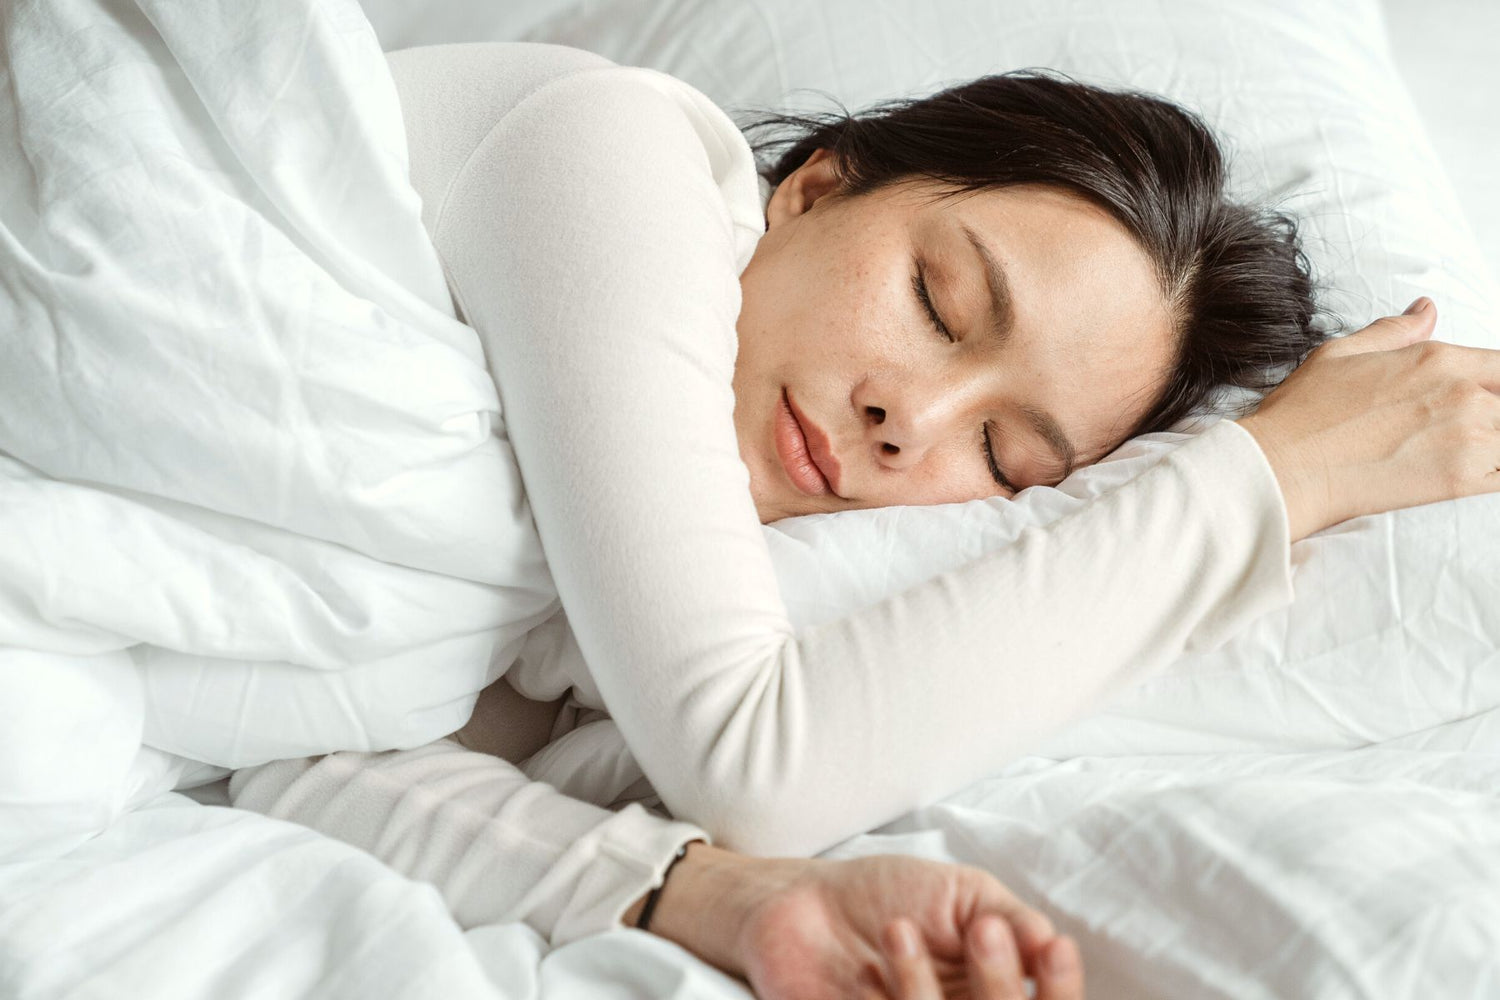 A woman peacefully sleeping in a cozy bed.